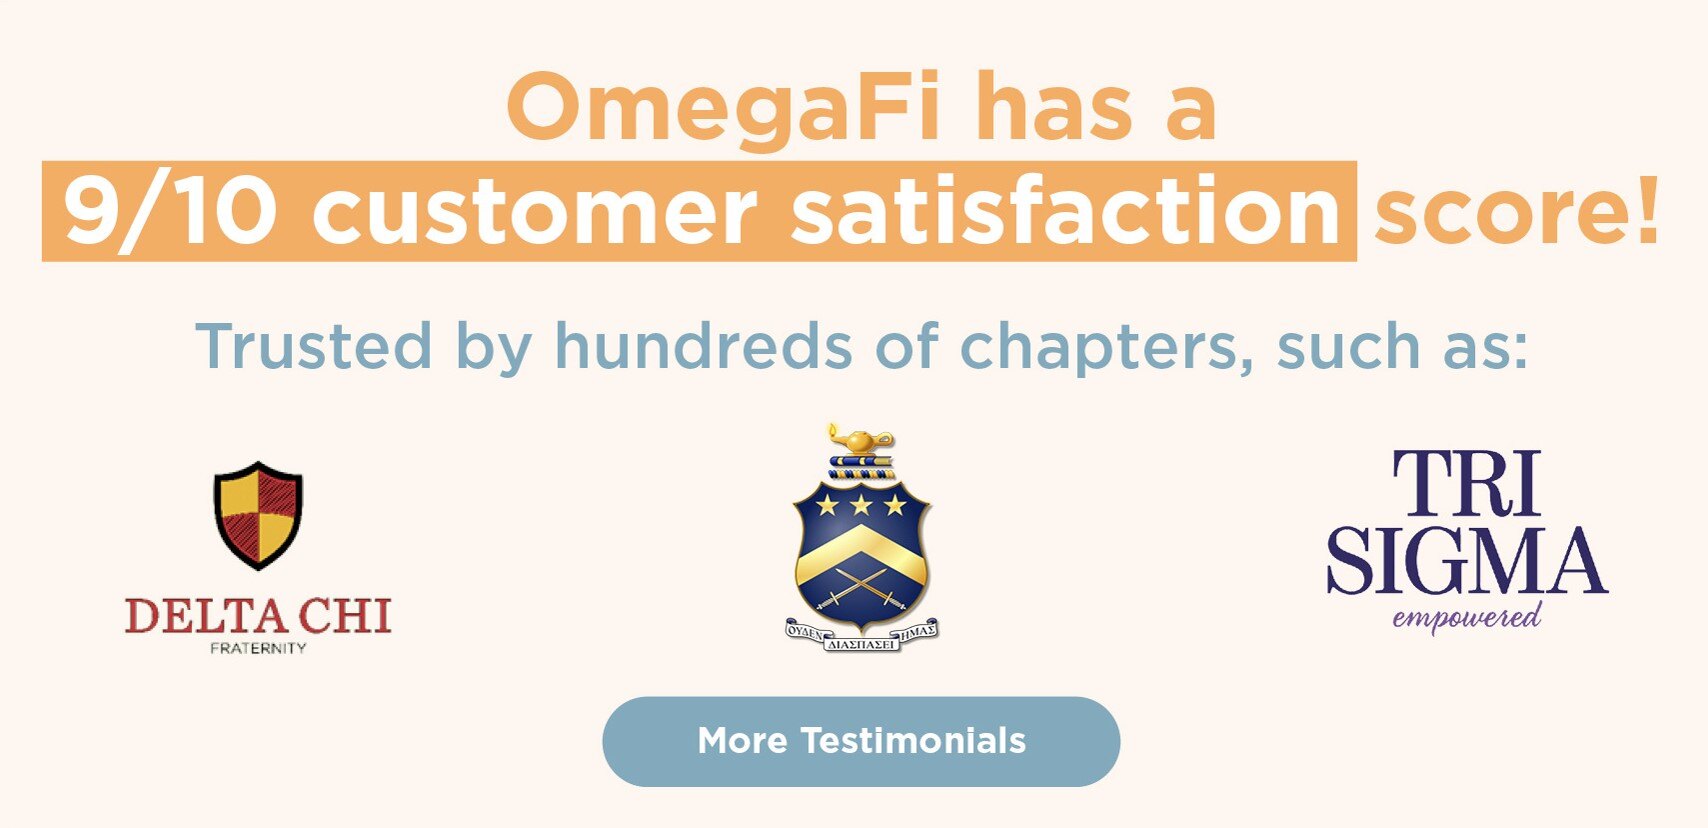 OmegaFi has a 9/10 customer satisfaction score. Click here to read more testimonials from raving fans.